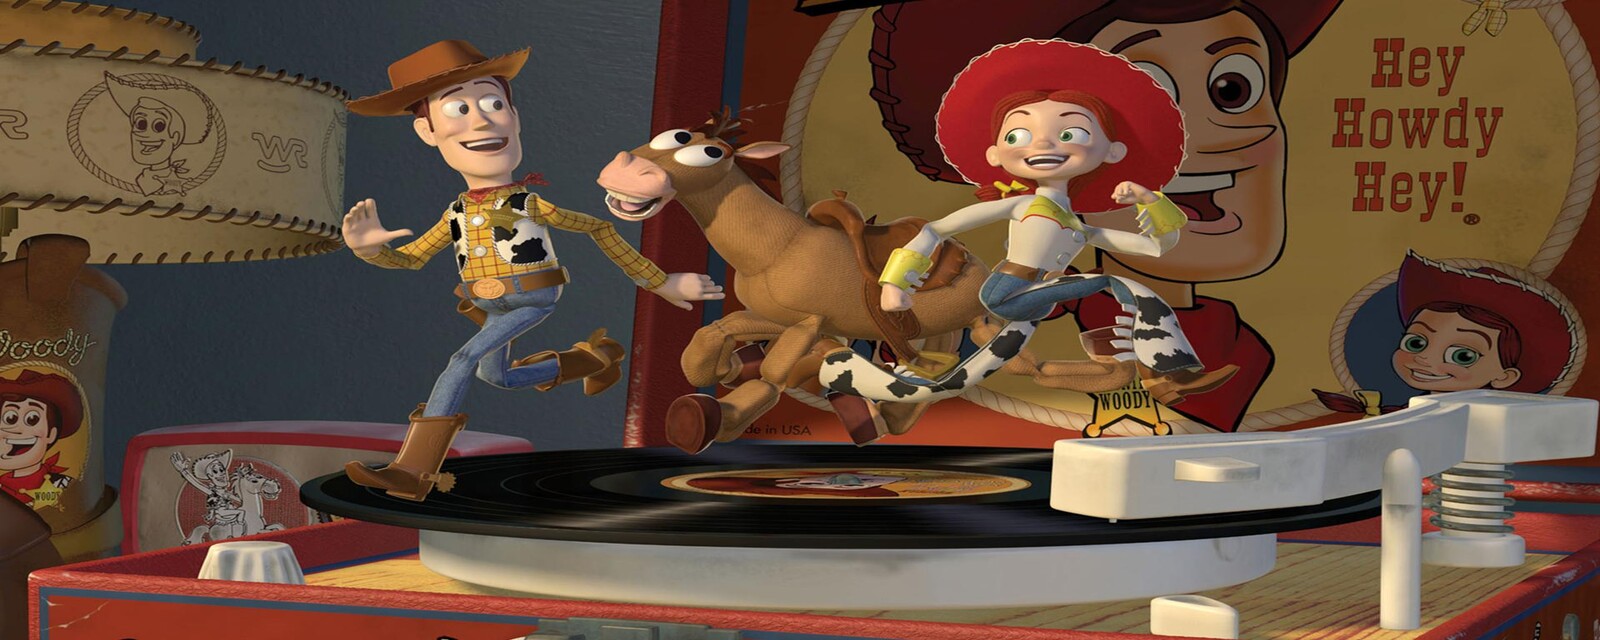 Celebrate The 25th Anniversary Of Toy Story With Toy Story 2 Now Streaming On Disney Disney